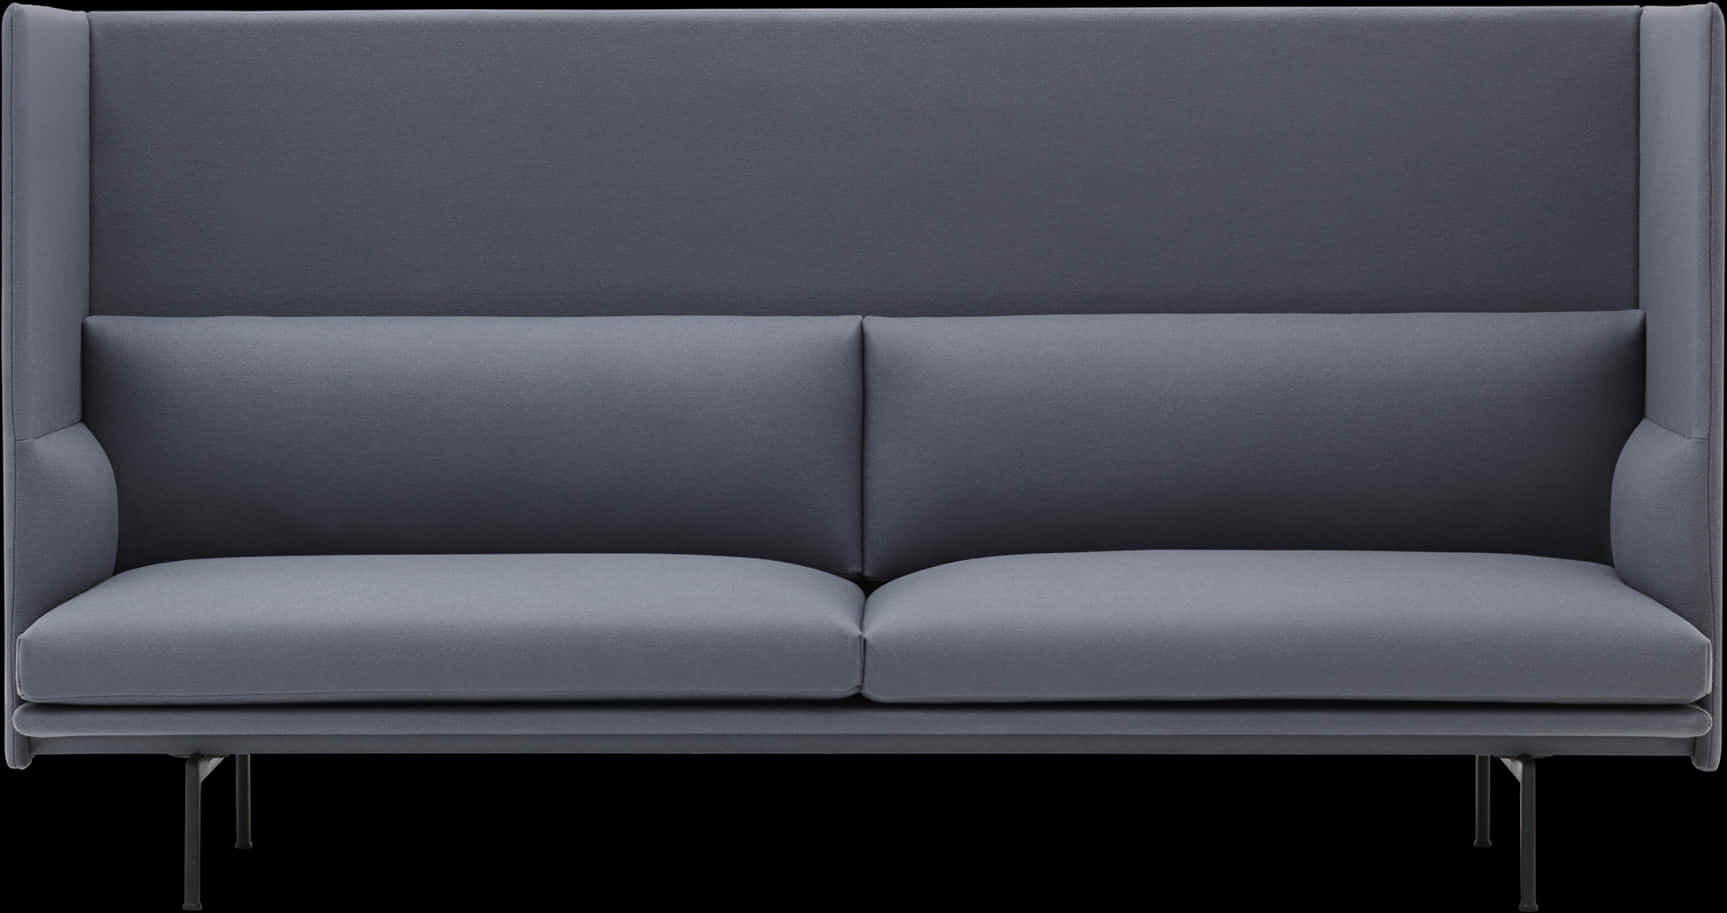 A Grey Couch With A Black Background